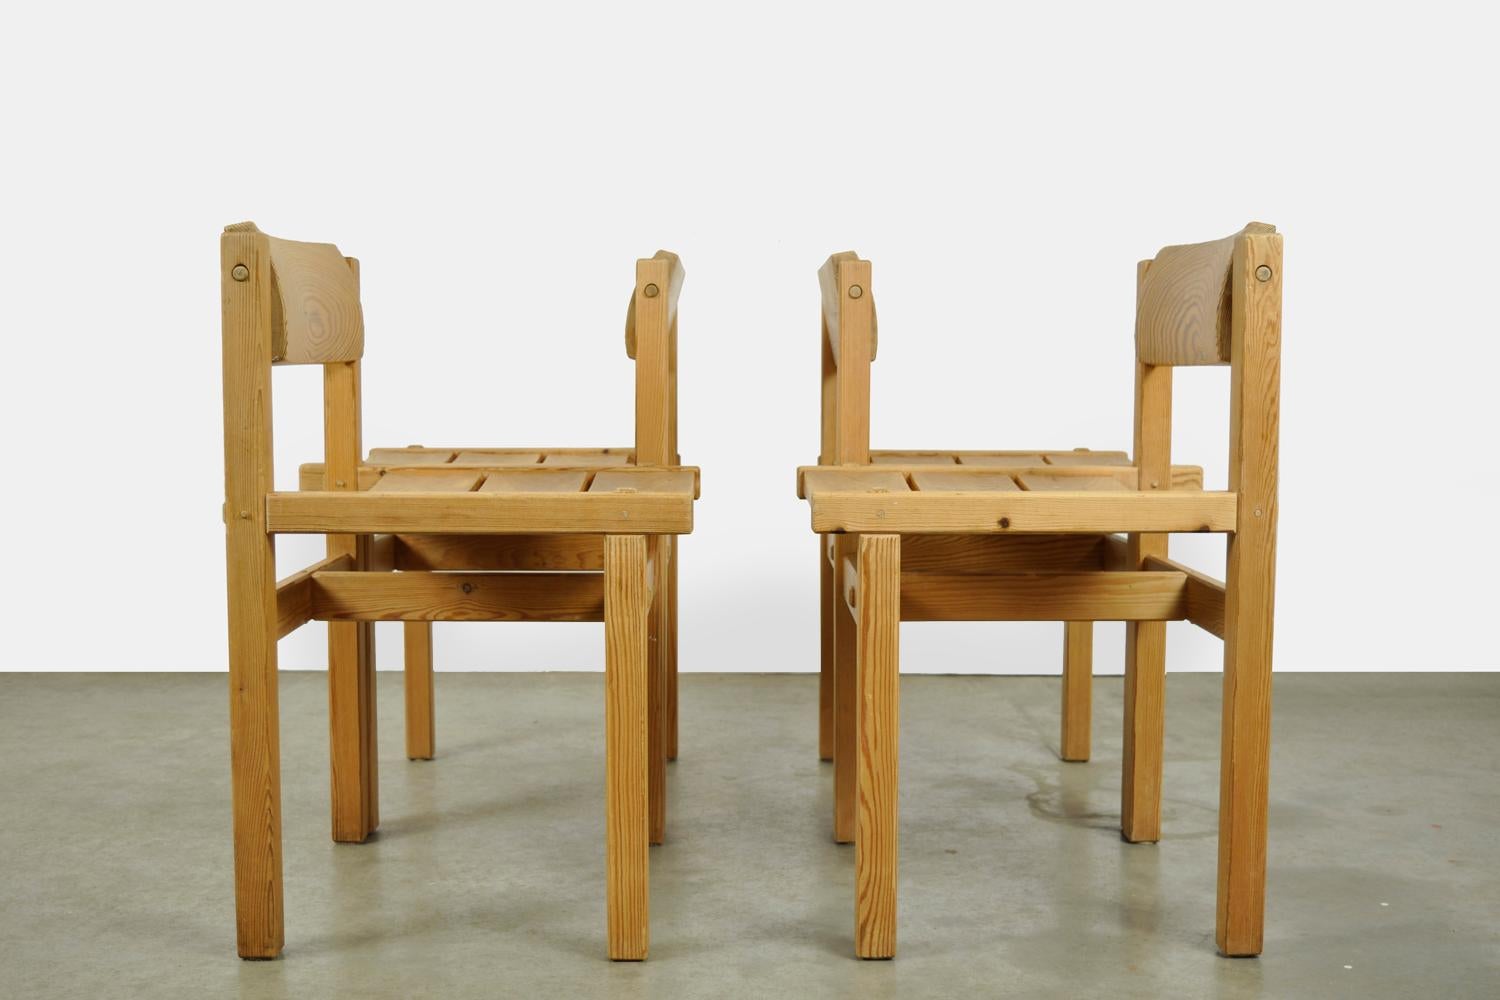 Pine Trybo pine dining chairs (4) by Edvin Helseth for Stange Bruk, Norway 1960s For Sale